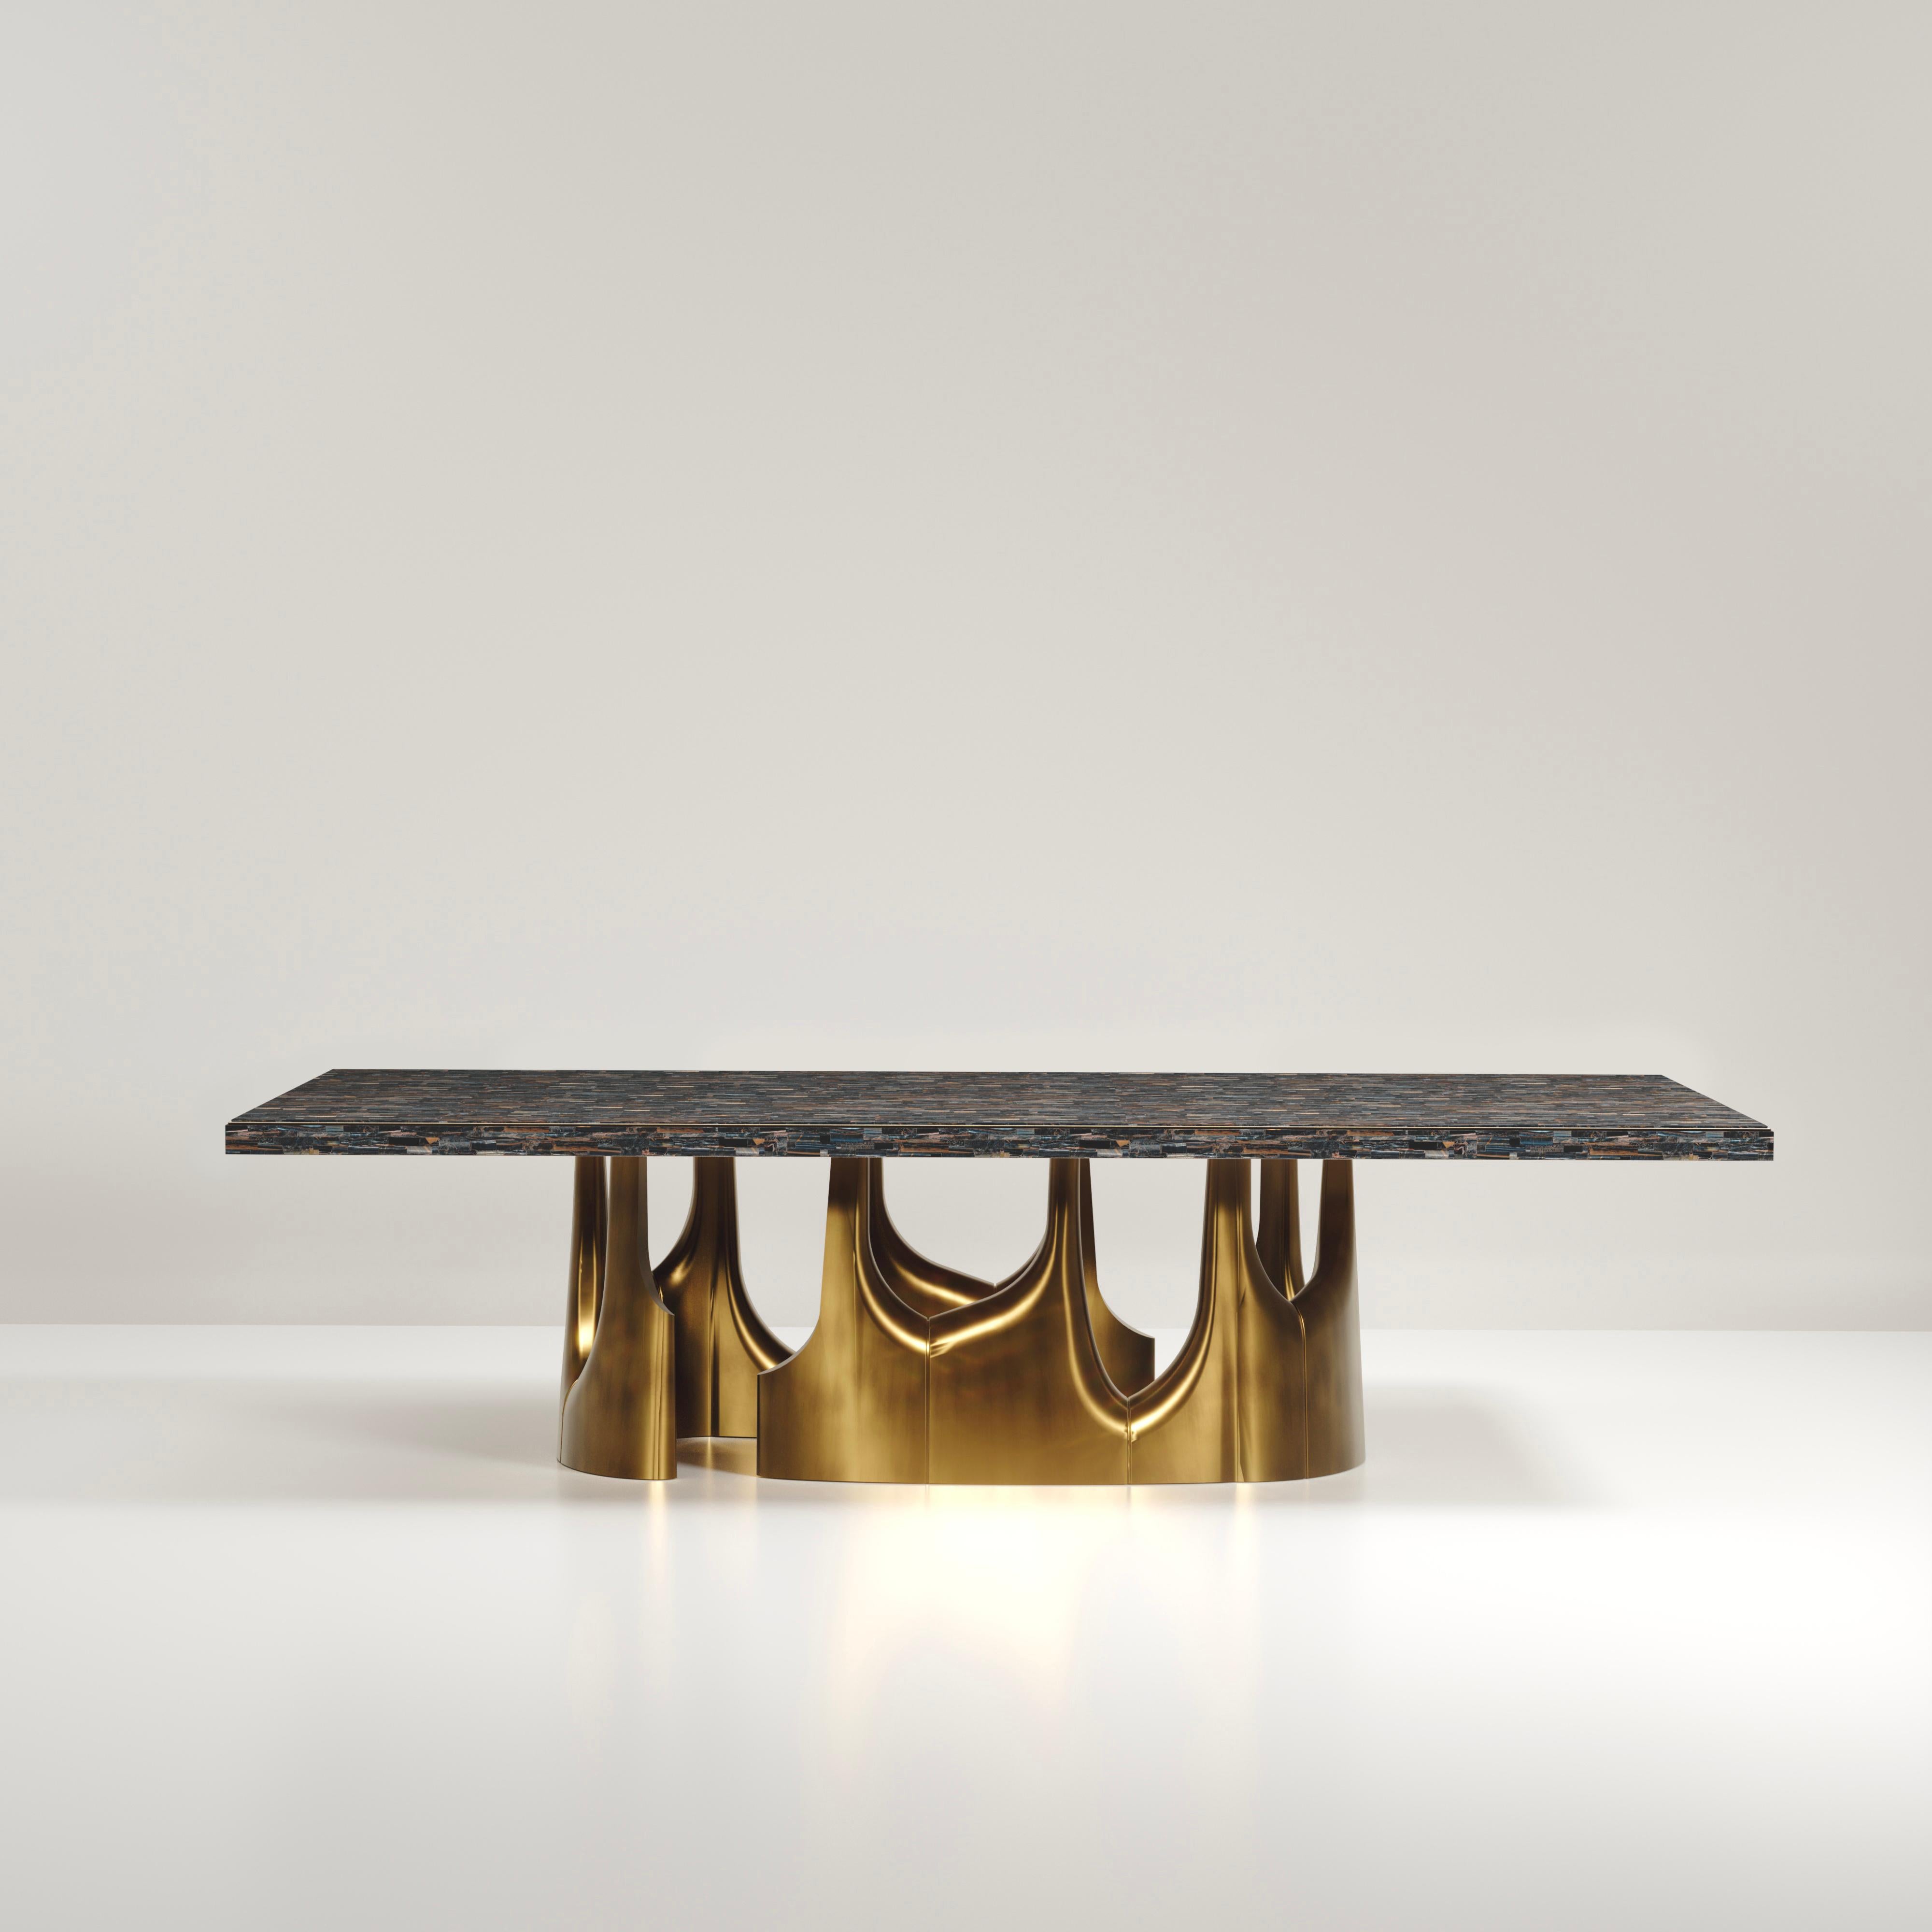 The Triptych II dining table by R&Y Augousti is a stunning multi-faceted sculptural piece. The beautiful hand craved details on the long clustered bronze-patina base demonstrate the incredible artisan work of Augousti. The top is in an incredible